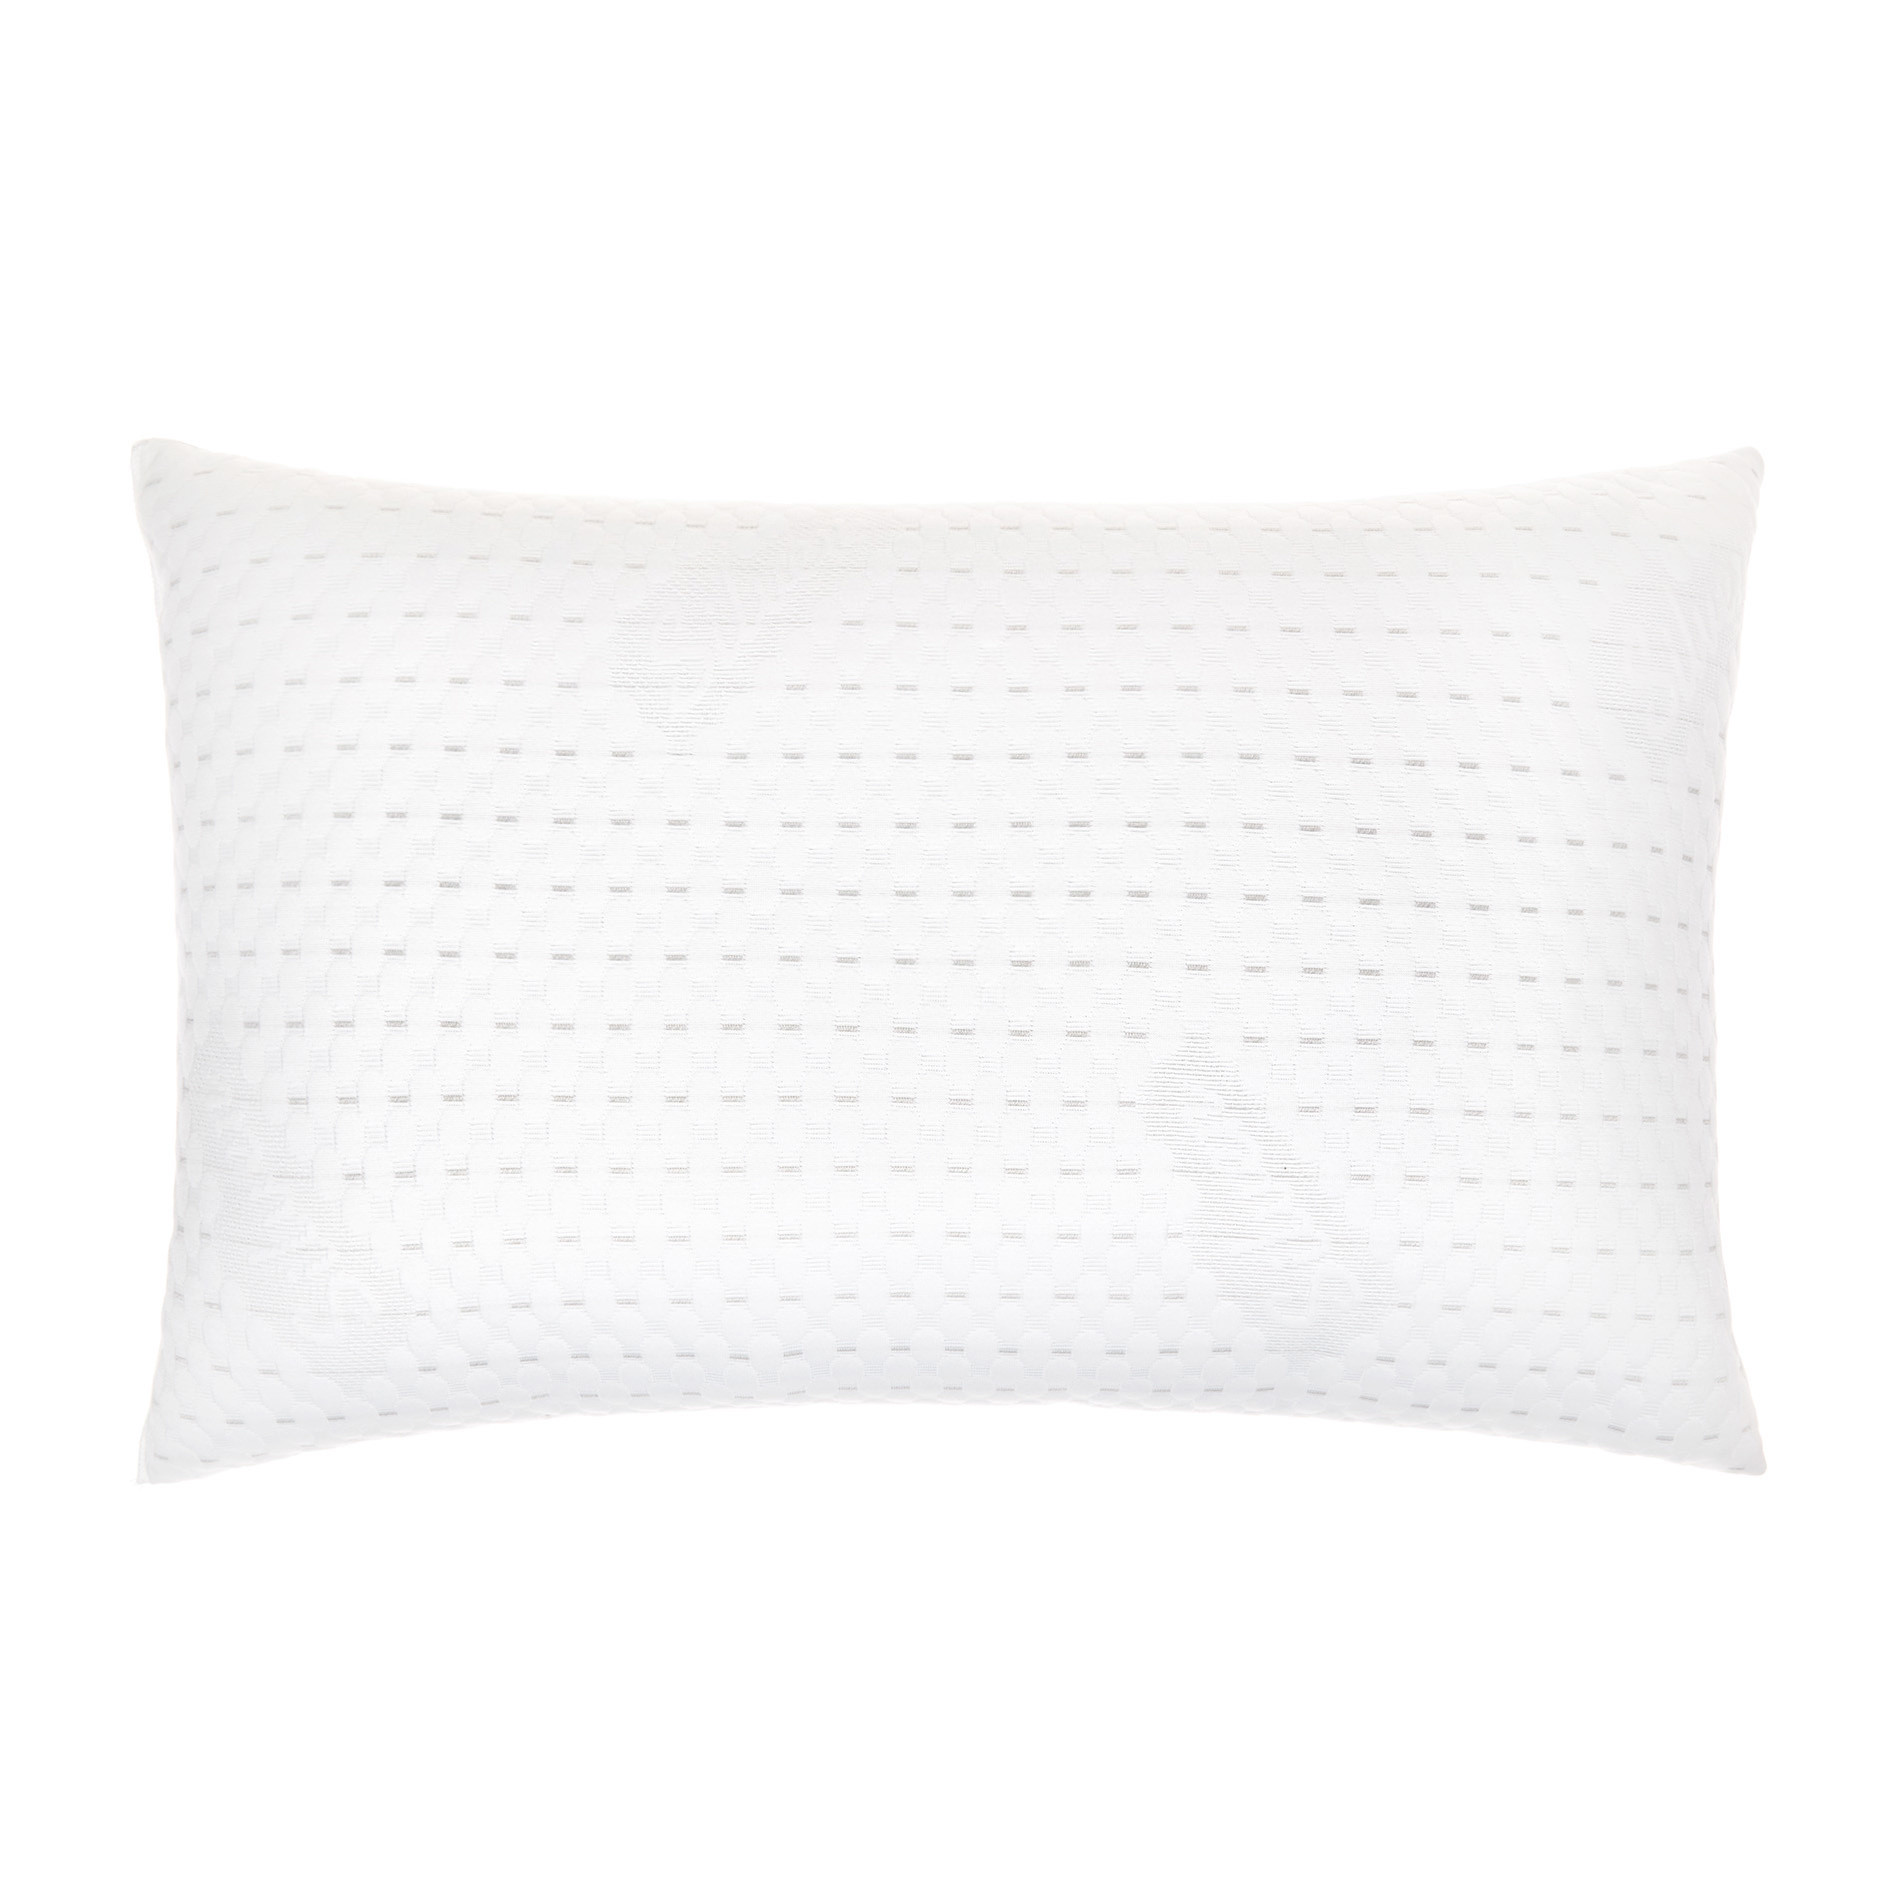 Hypoallergenic pillow with aloe vera treatment, White, large image number 0